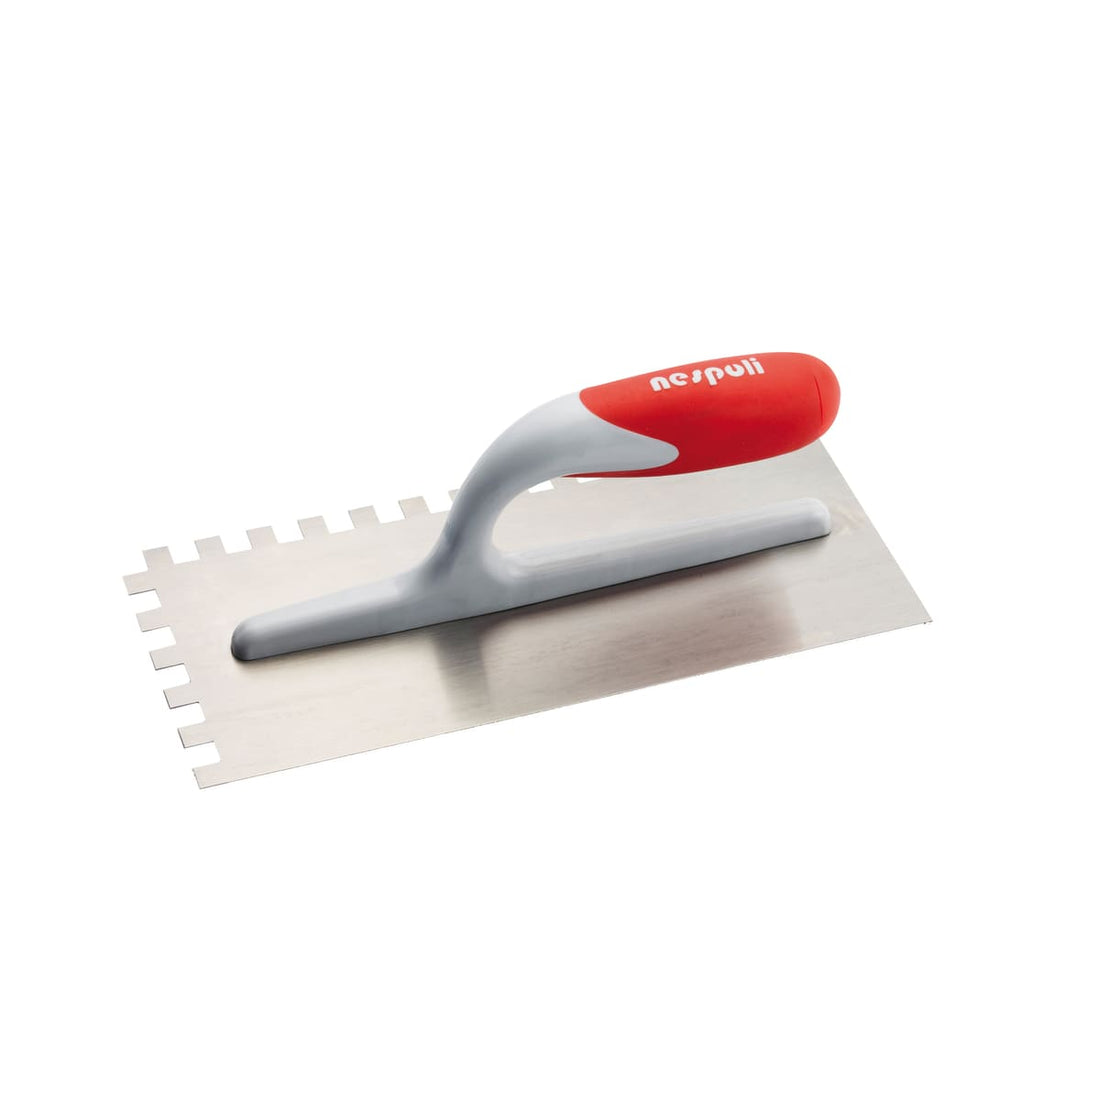 USA AIR TOUCH STEEL TROWEL POLYPROPYLENE HANDLE, TOOTHING 8MM, SIZE 12X28CM